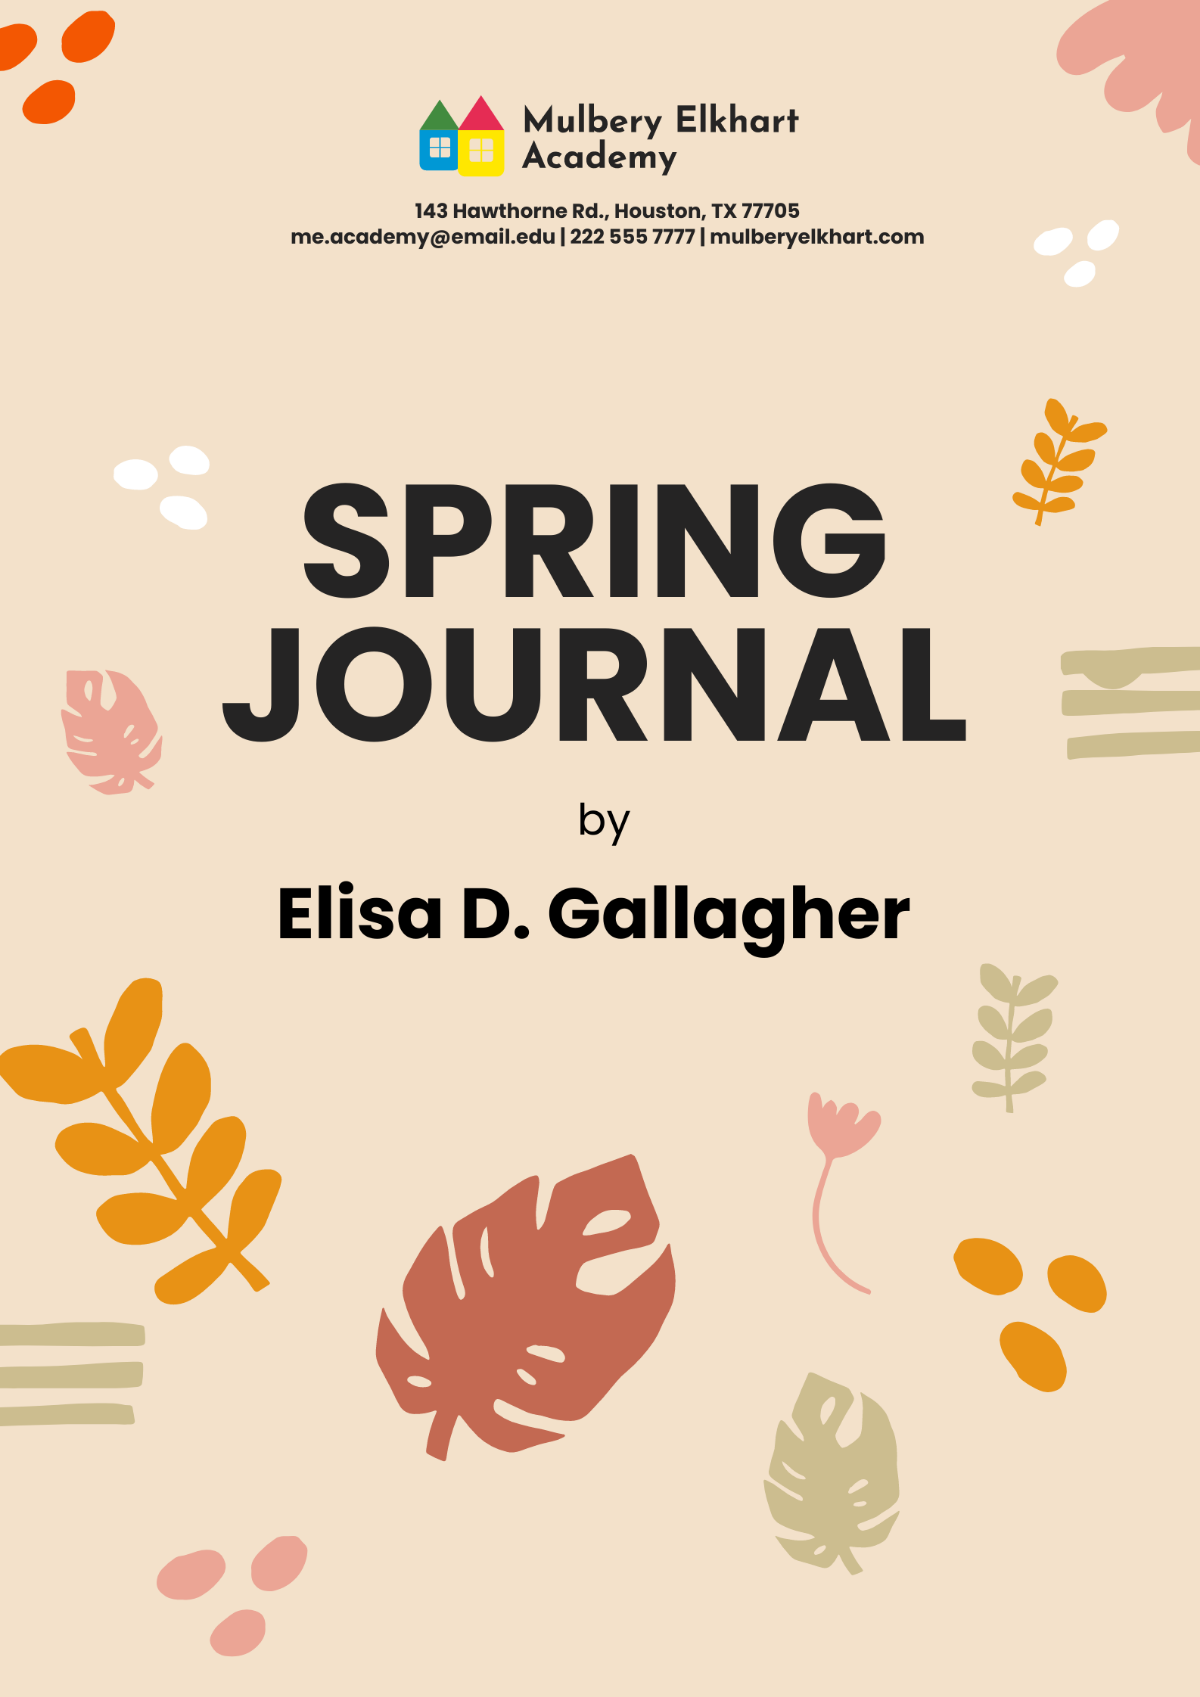 Spring Journal Template